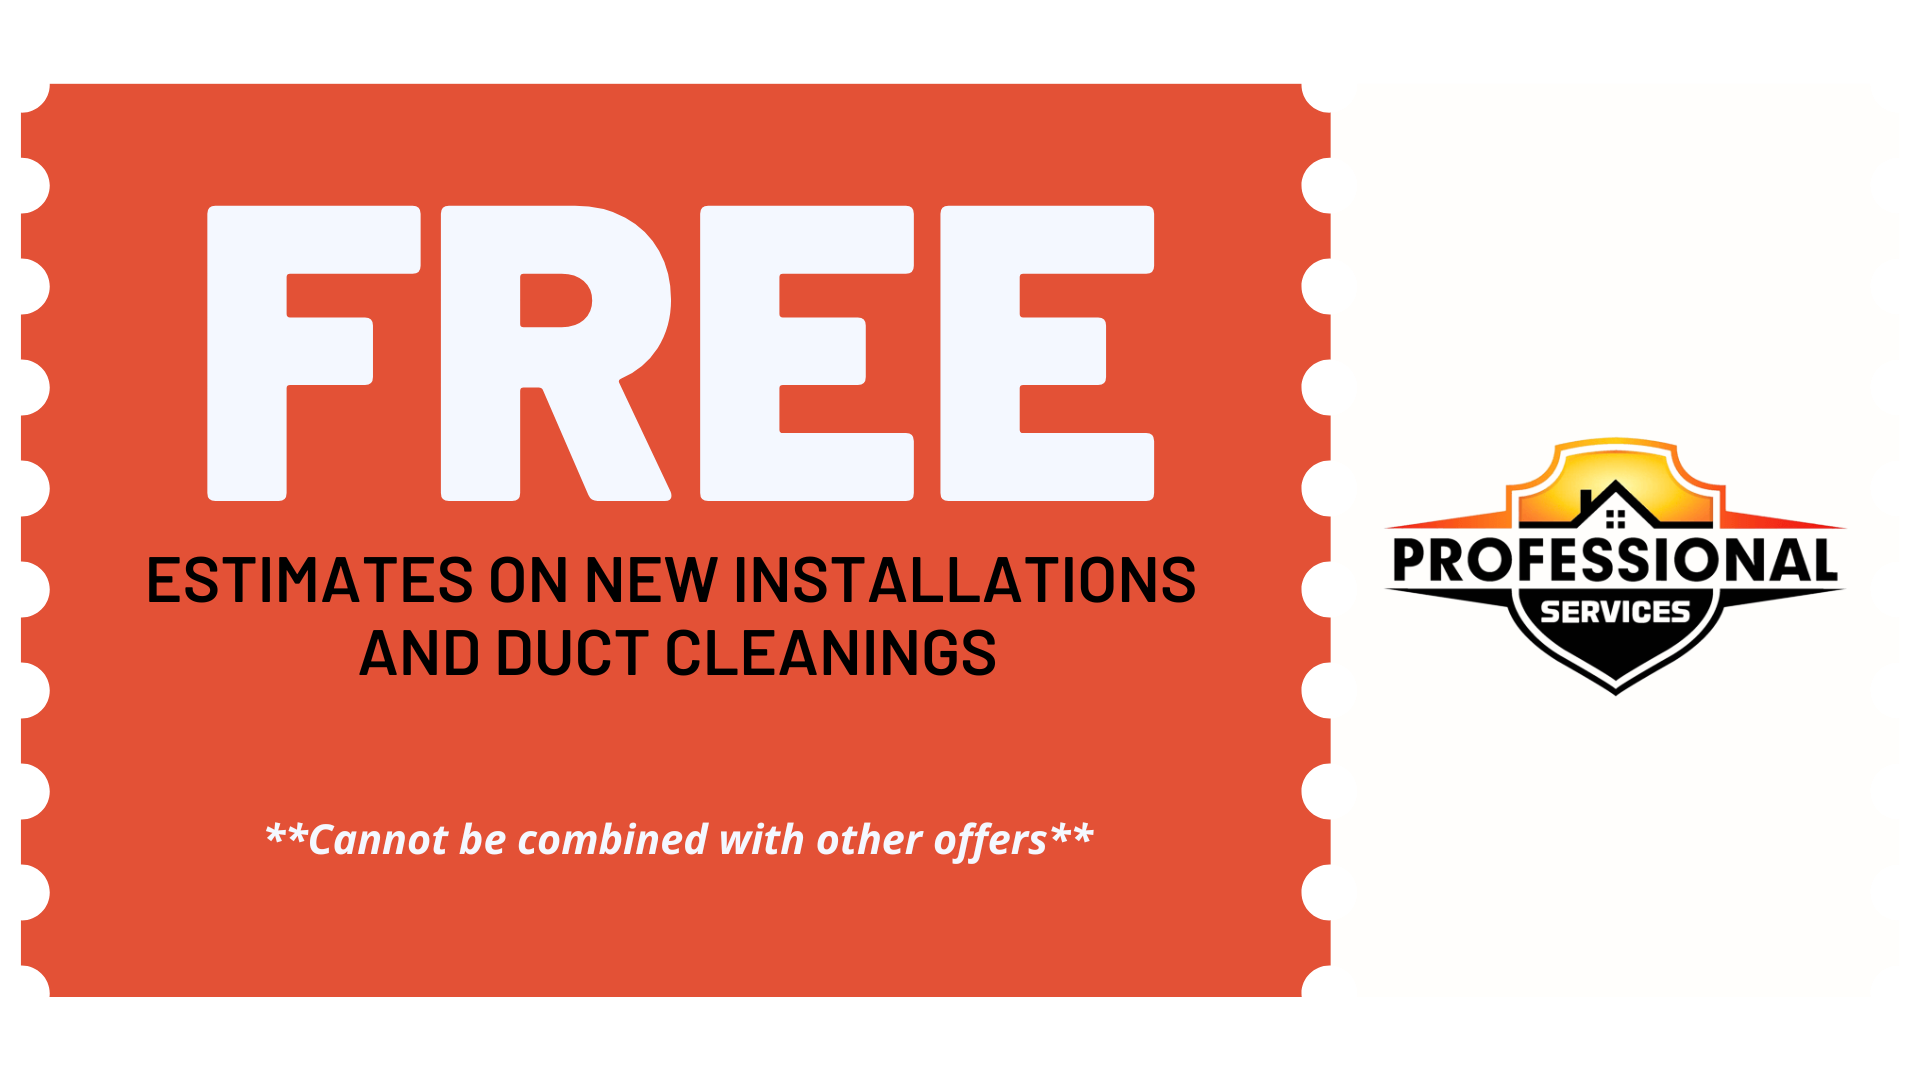 Special Offer - FREE Estimates on New Installations & Duct Cleanings